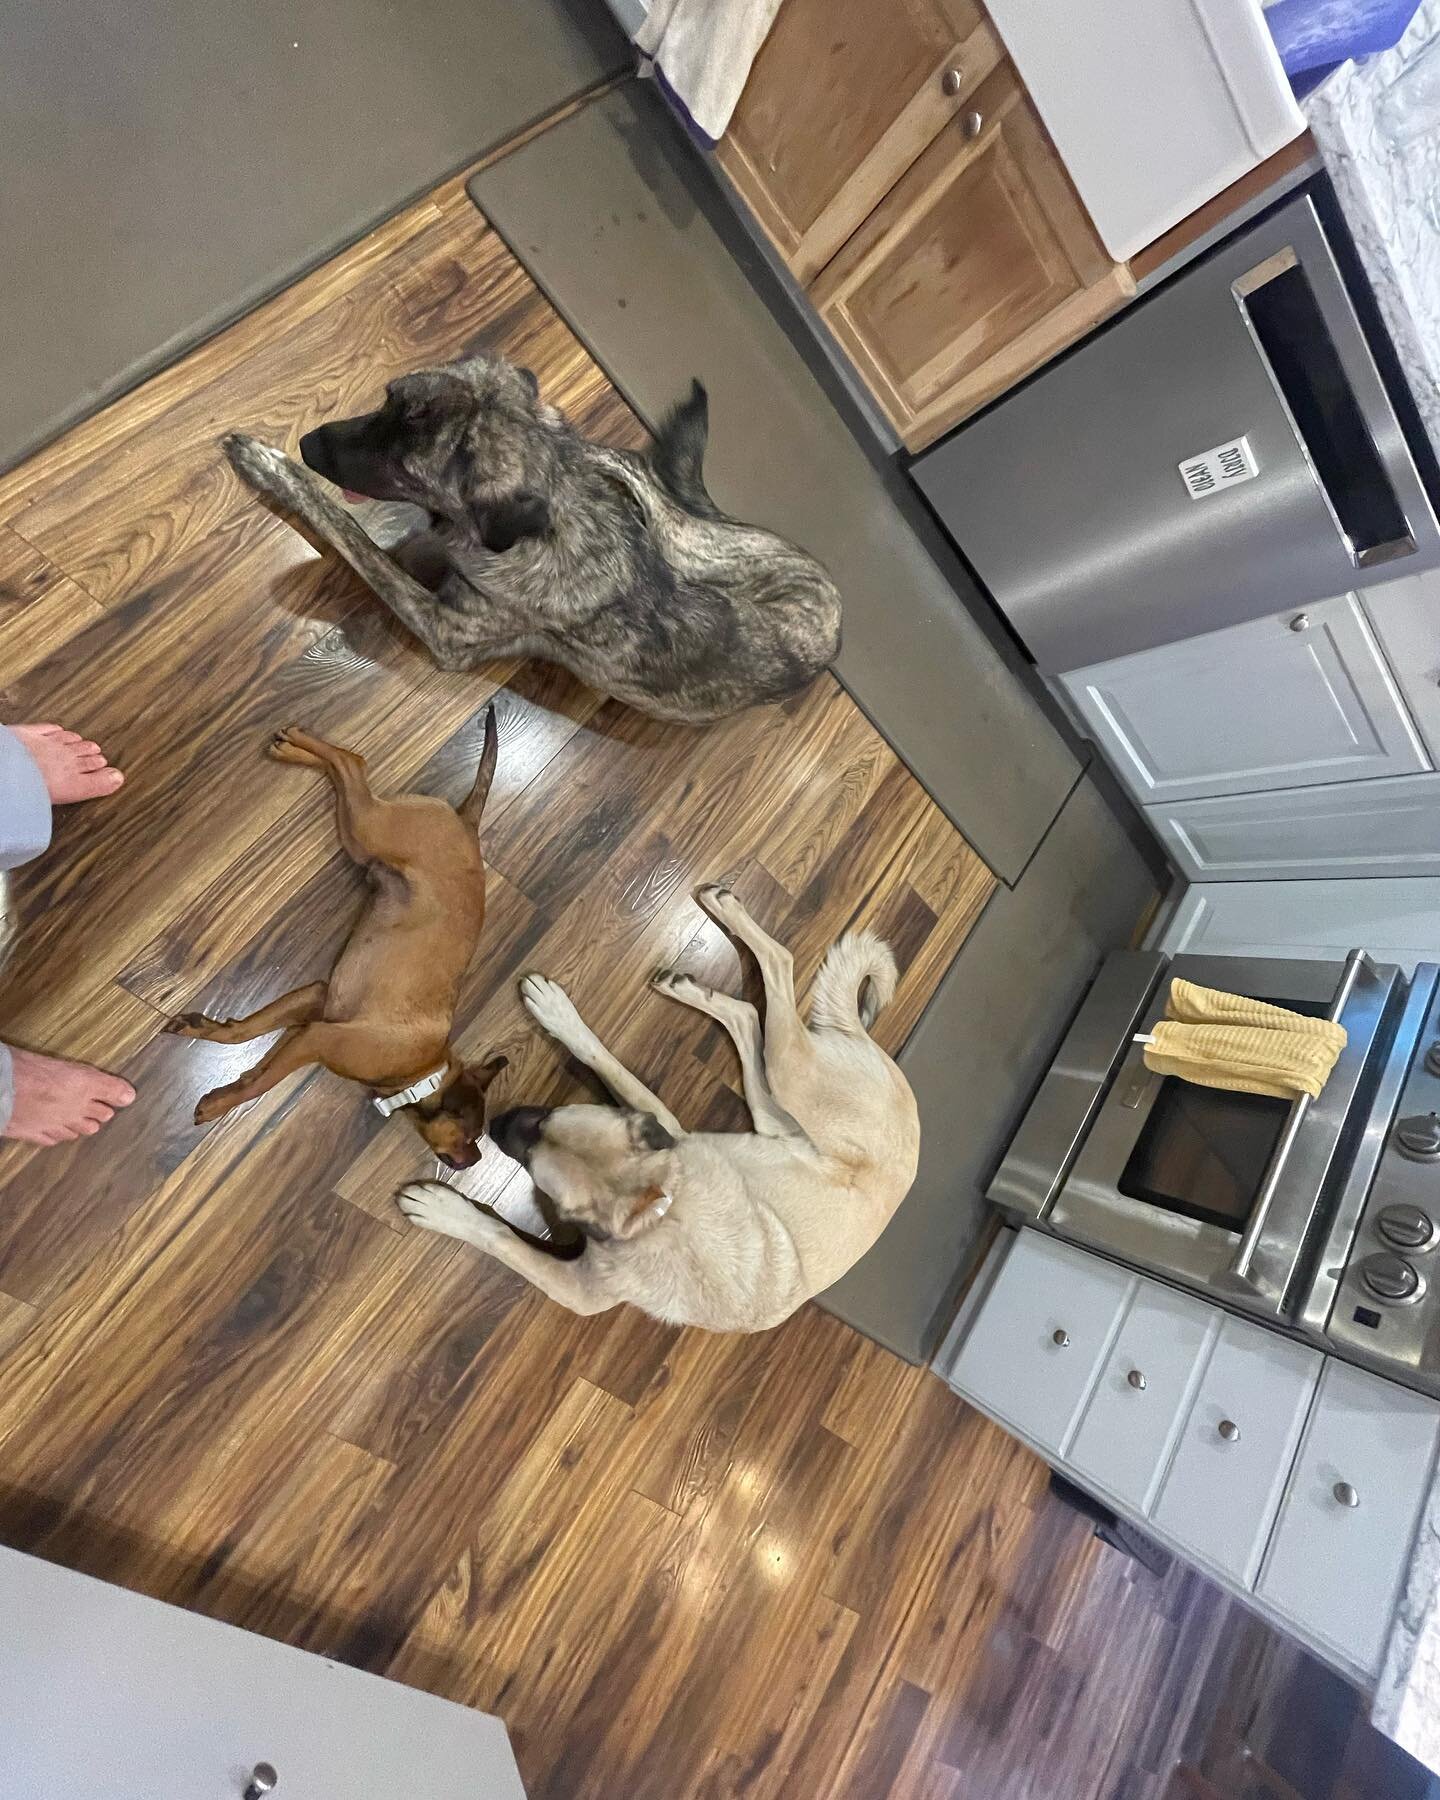 If you can&rsquo;t take the heat outside, come in the house and lay on the floor in my kitchen! Hot dogs enjoying some rare indoor time. Wow, they make my stove and dishwasher look tiny in comparison. Luna, Shadow, and Peanut ❤️
.
.
.
#dogdaysofsumme